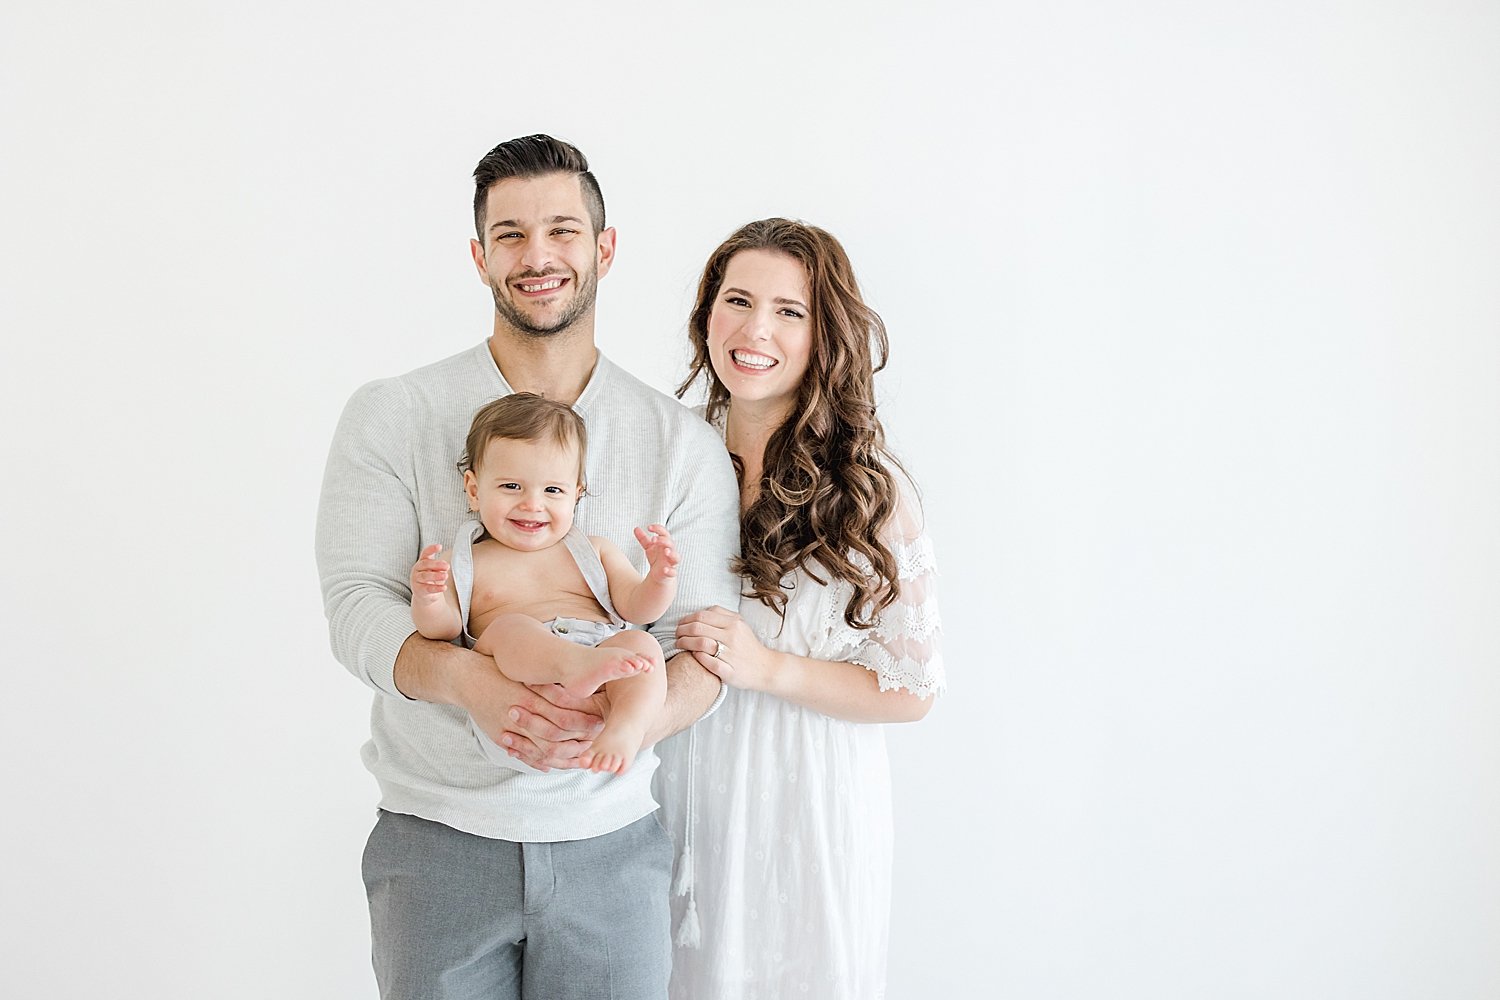 Why You Should Hire a Photographer for Your Baby's First Year | Parents with son during first birthday photoshoot | Kristin Wood Photography